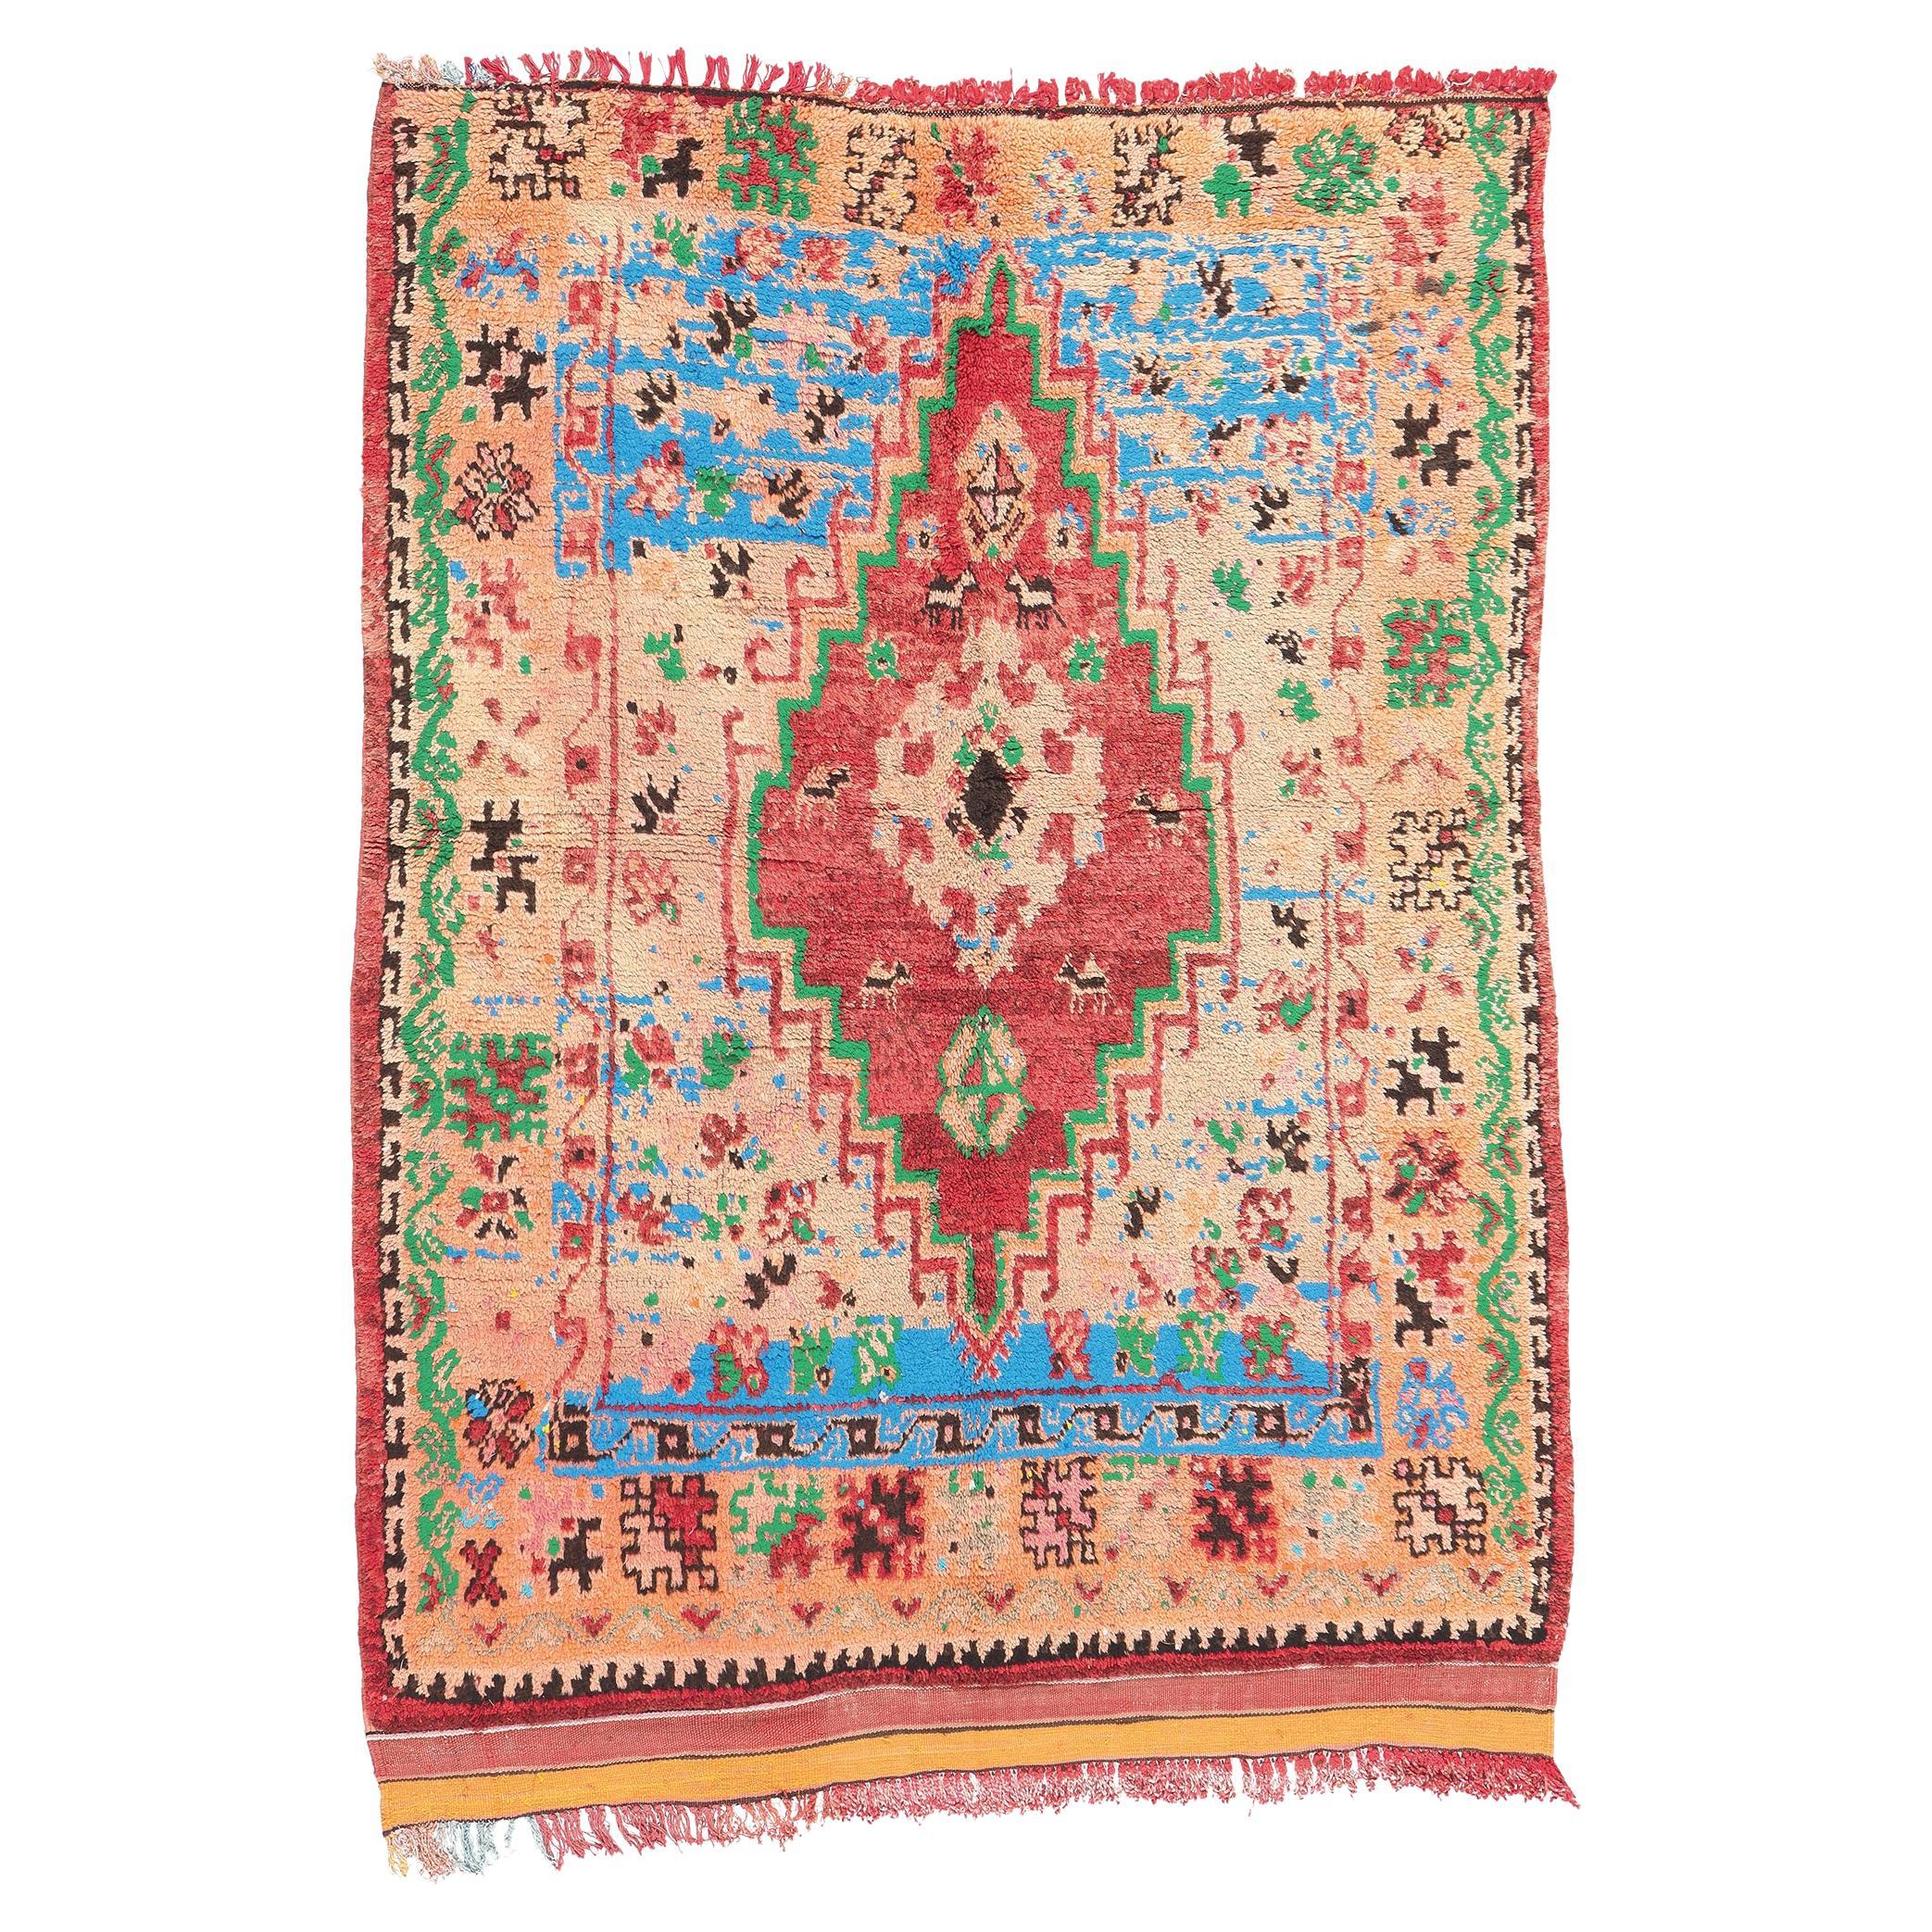 Vintage Boujad Moroccan Rug, Tribal Enchantment Meets Boho Chic Jungalow For Sale